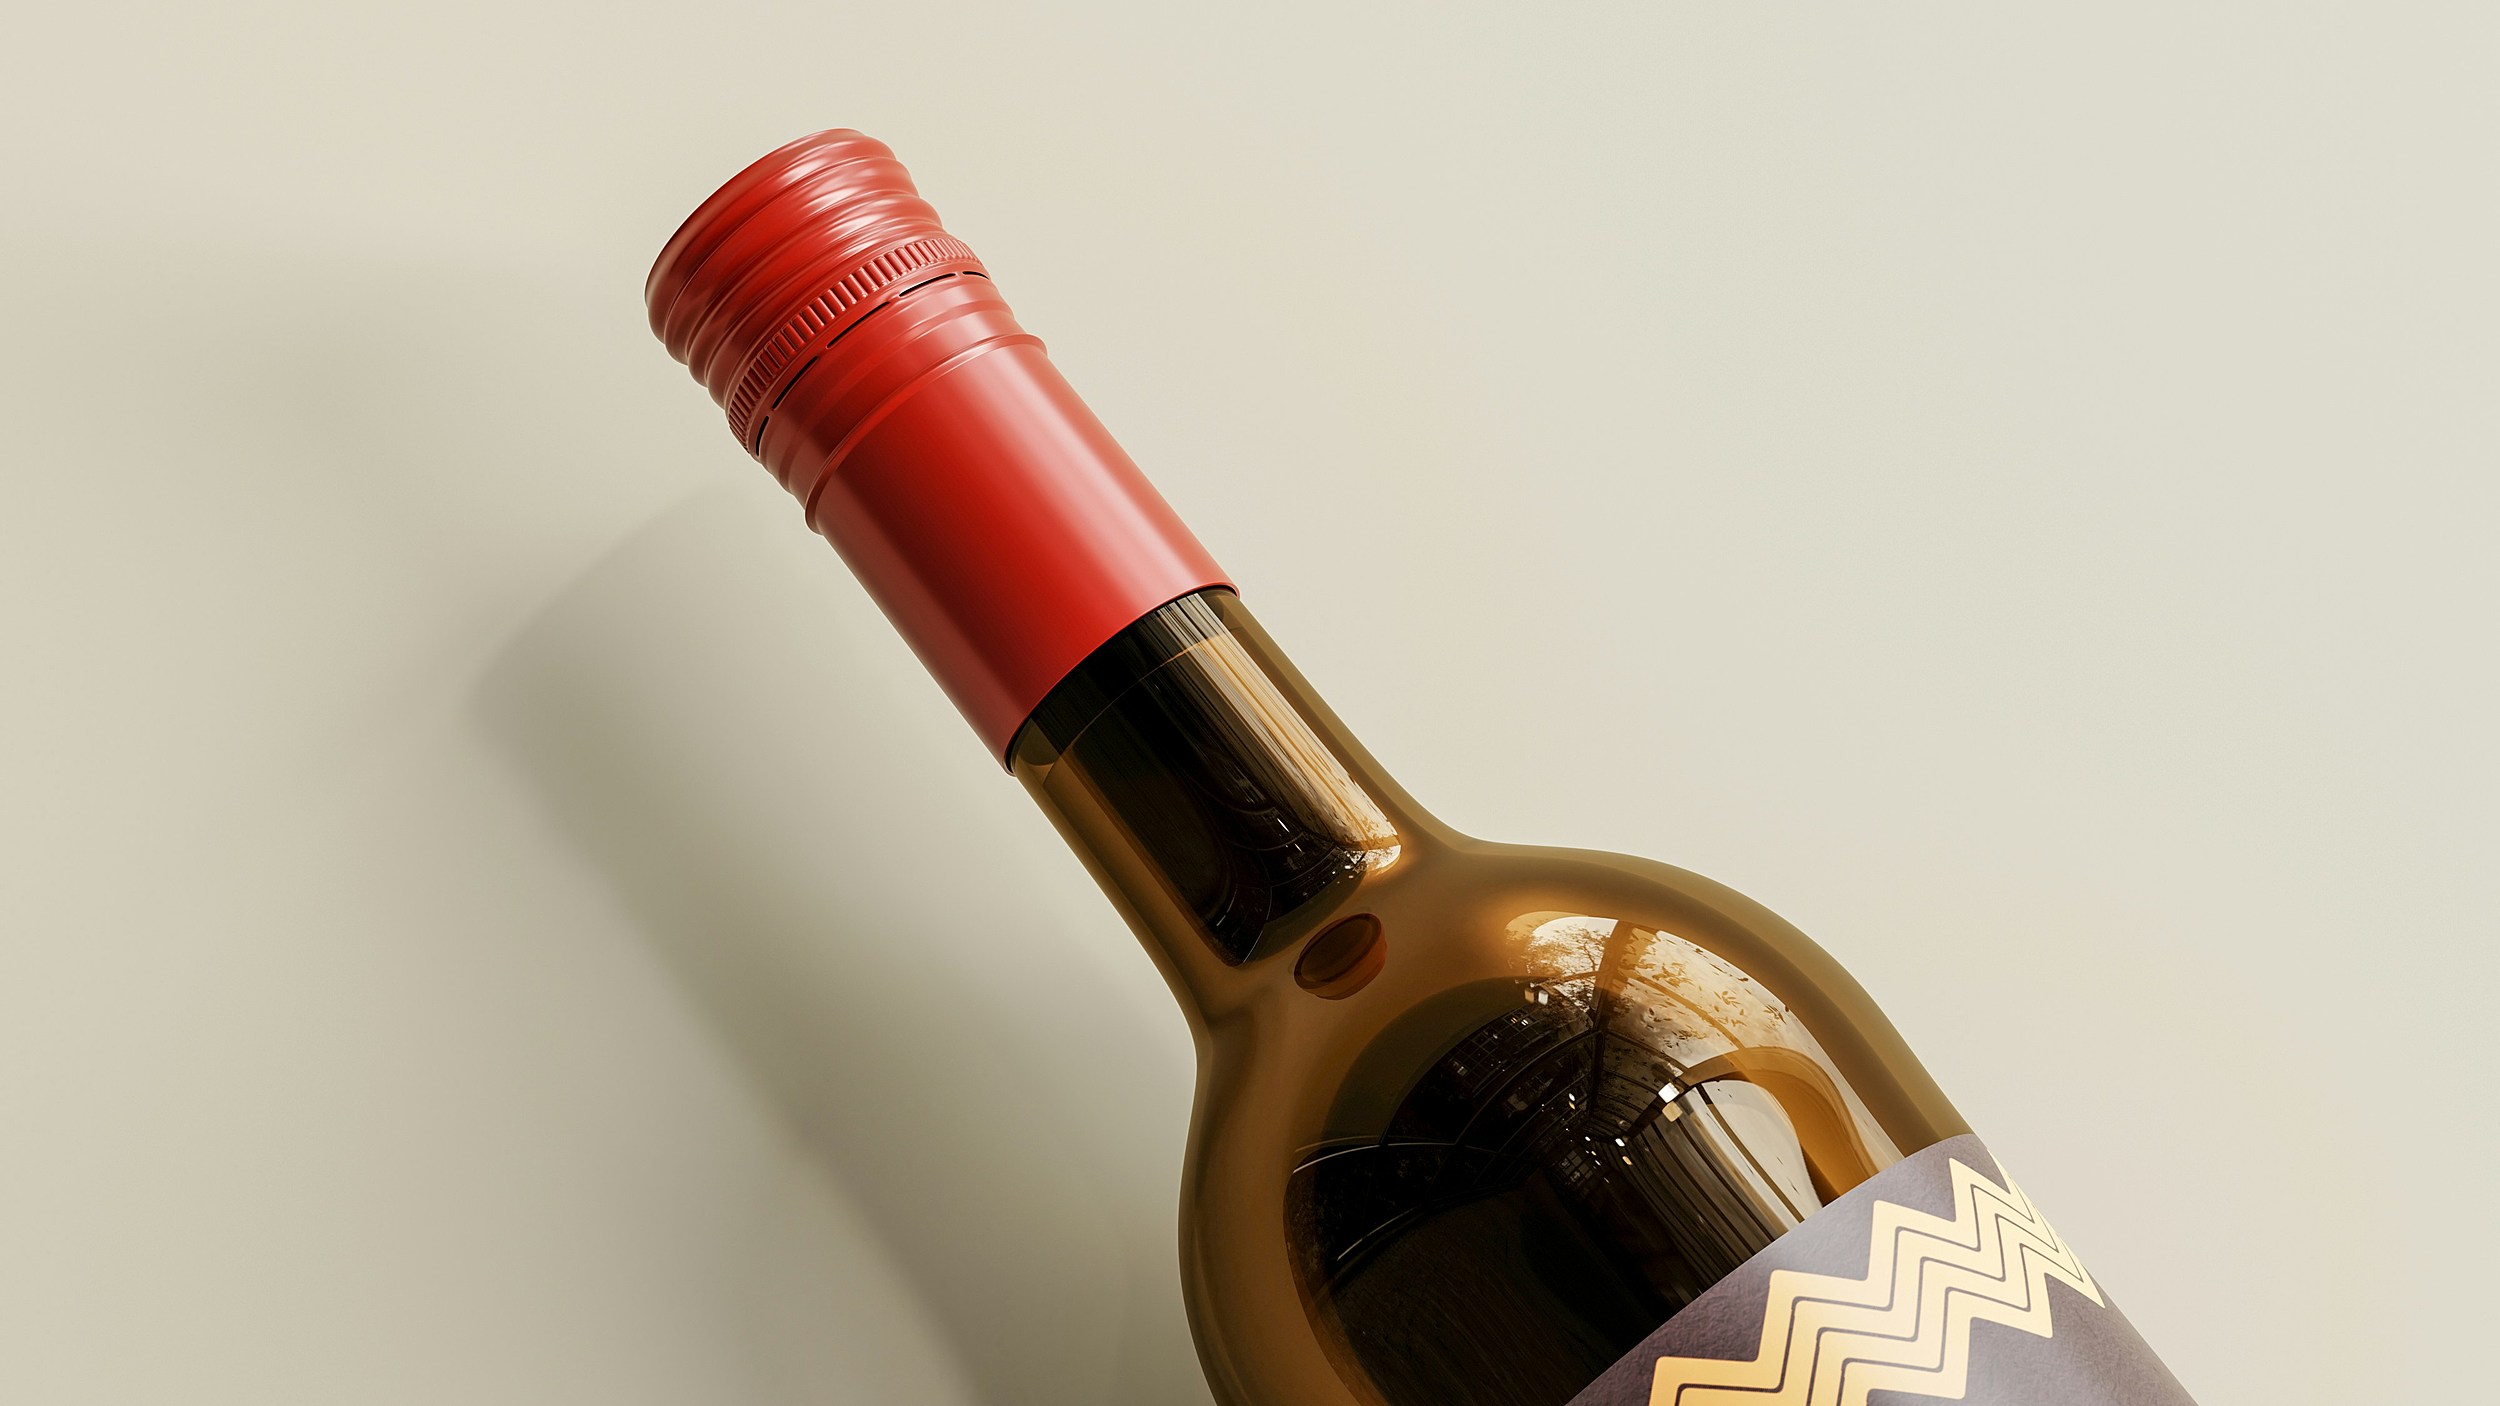 The Internet Finds New Way to Open Wine Bottle, Without Corkscrew